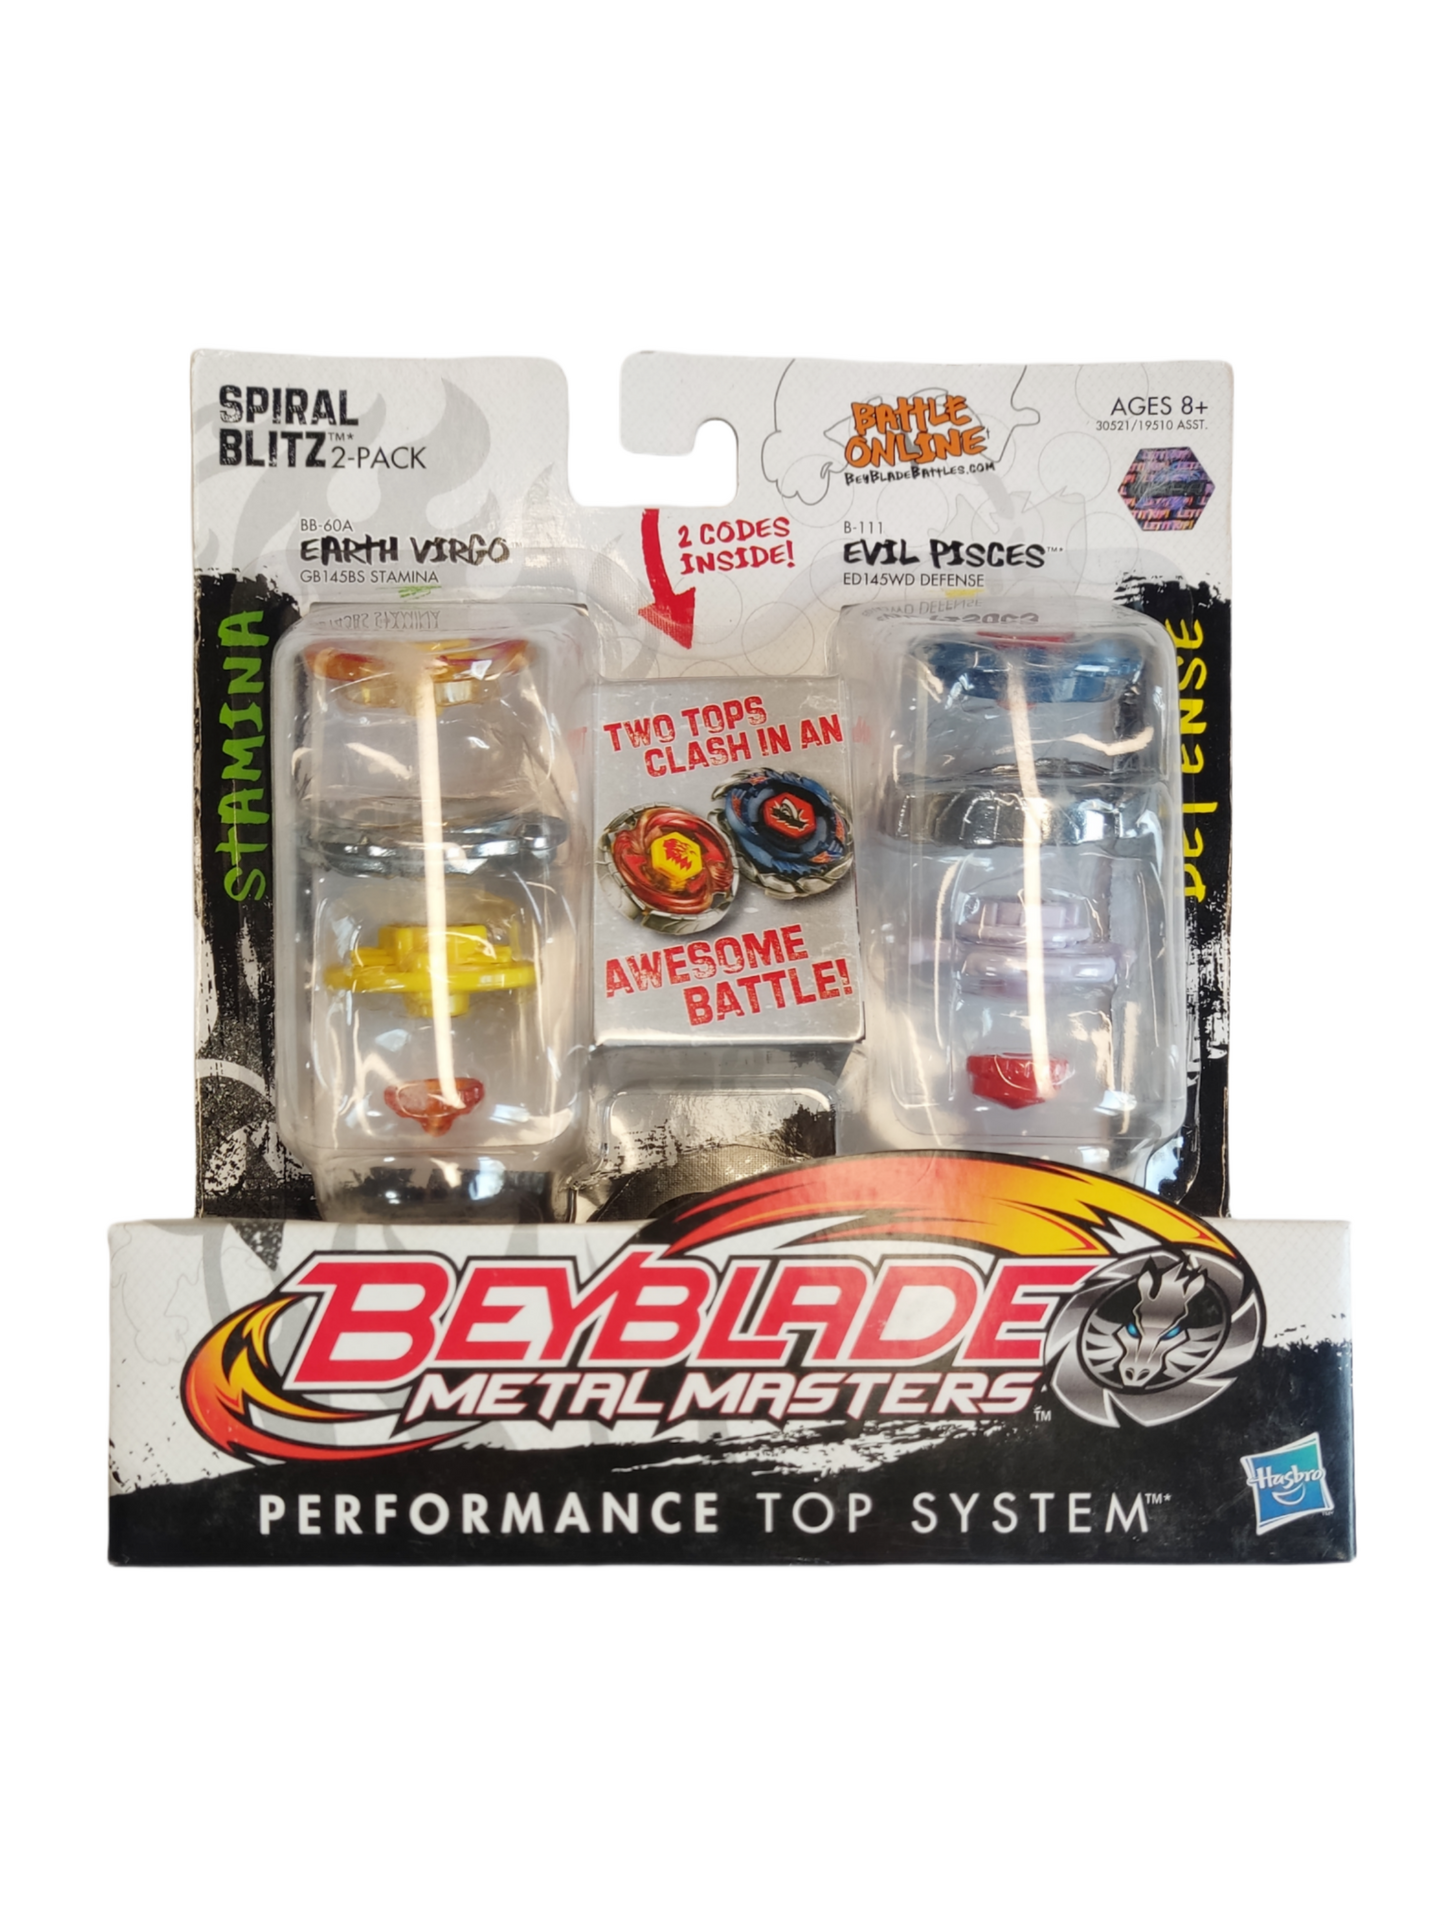 2-Pack: Earth Virgo BB-60A und Evil Pisces B-111 Hasbro Beyblade Metal Masters